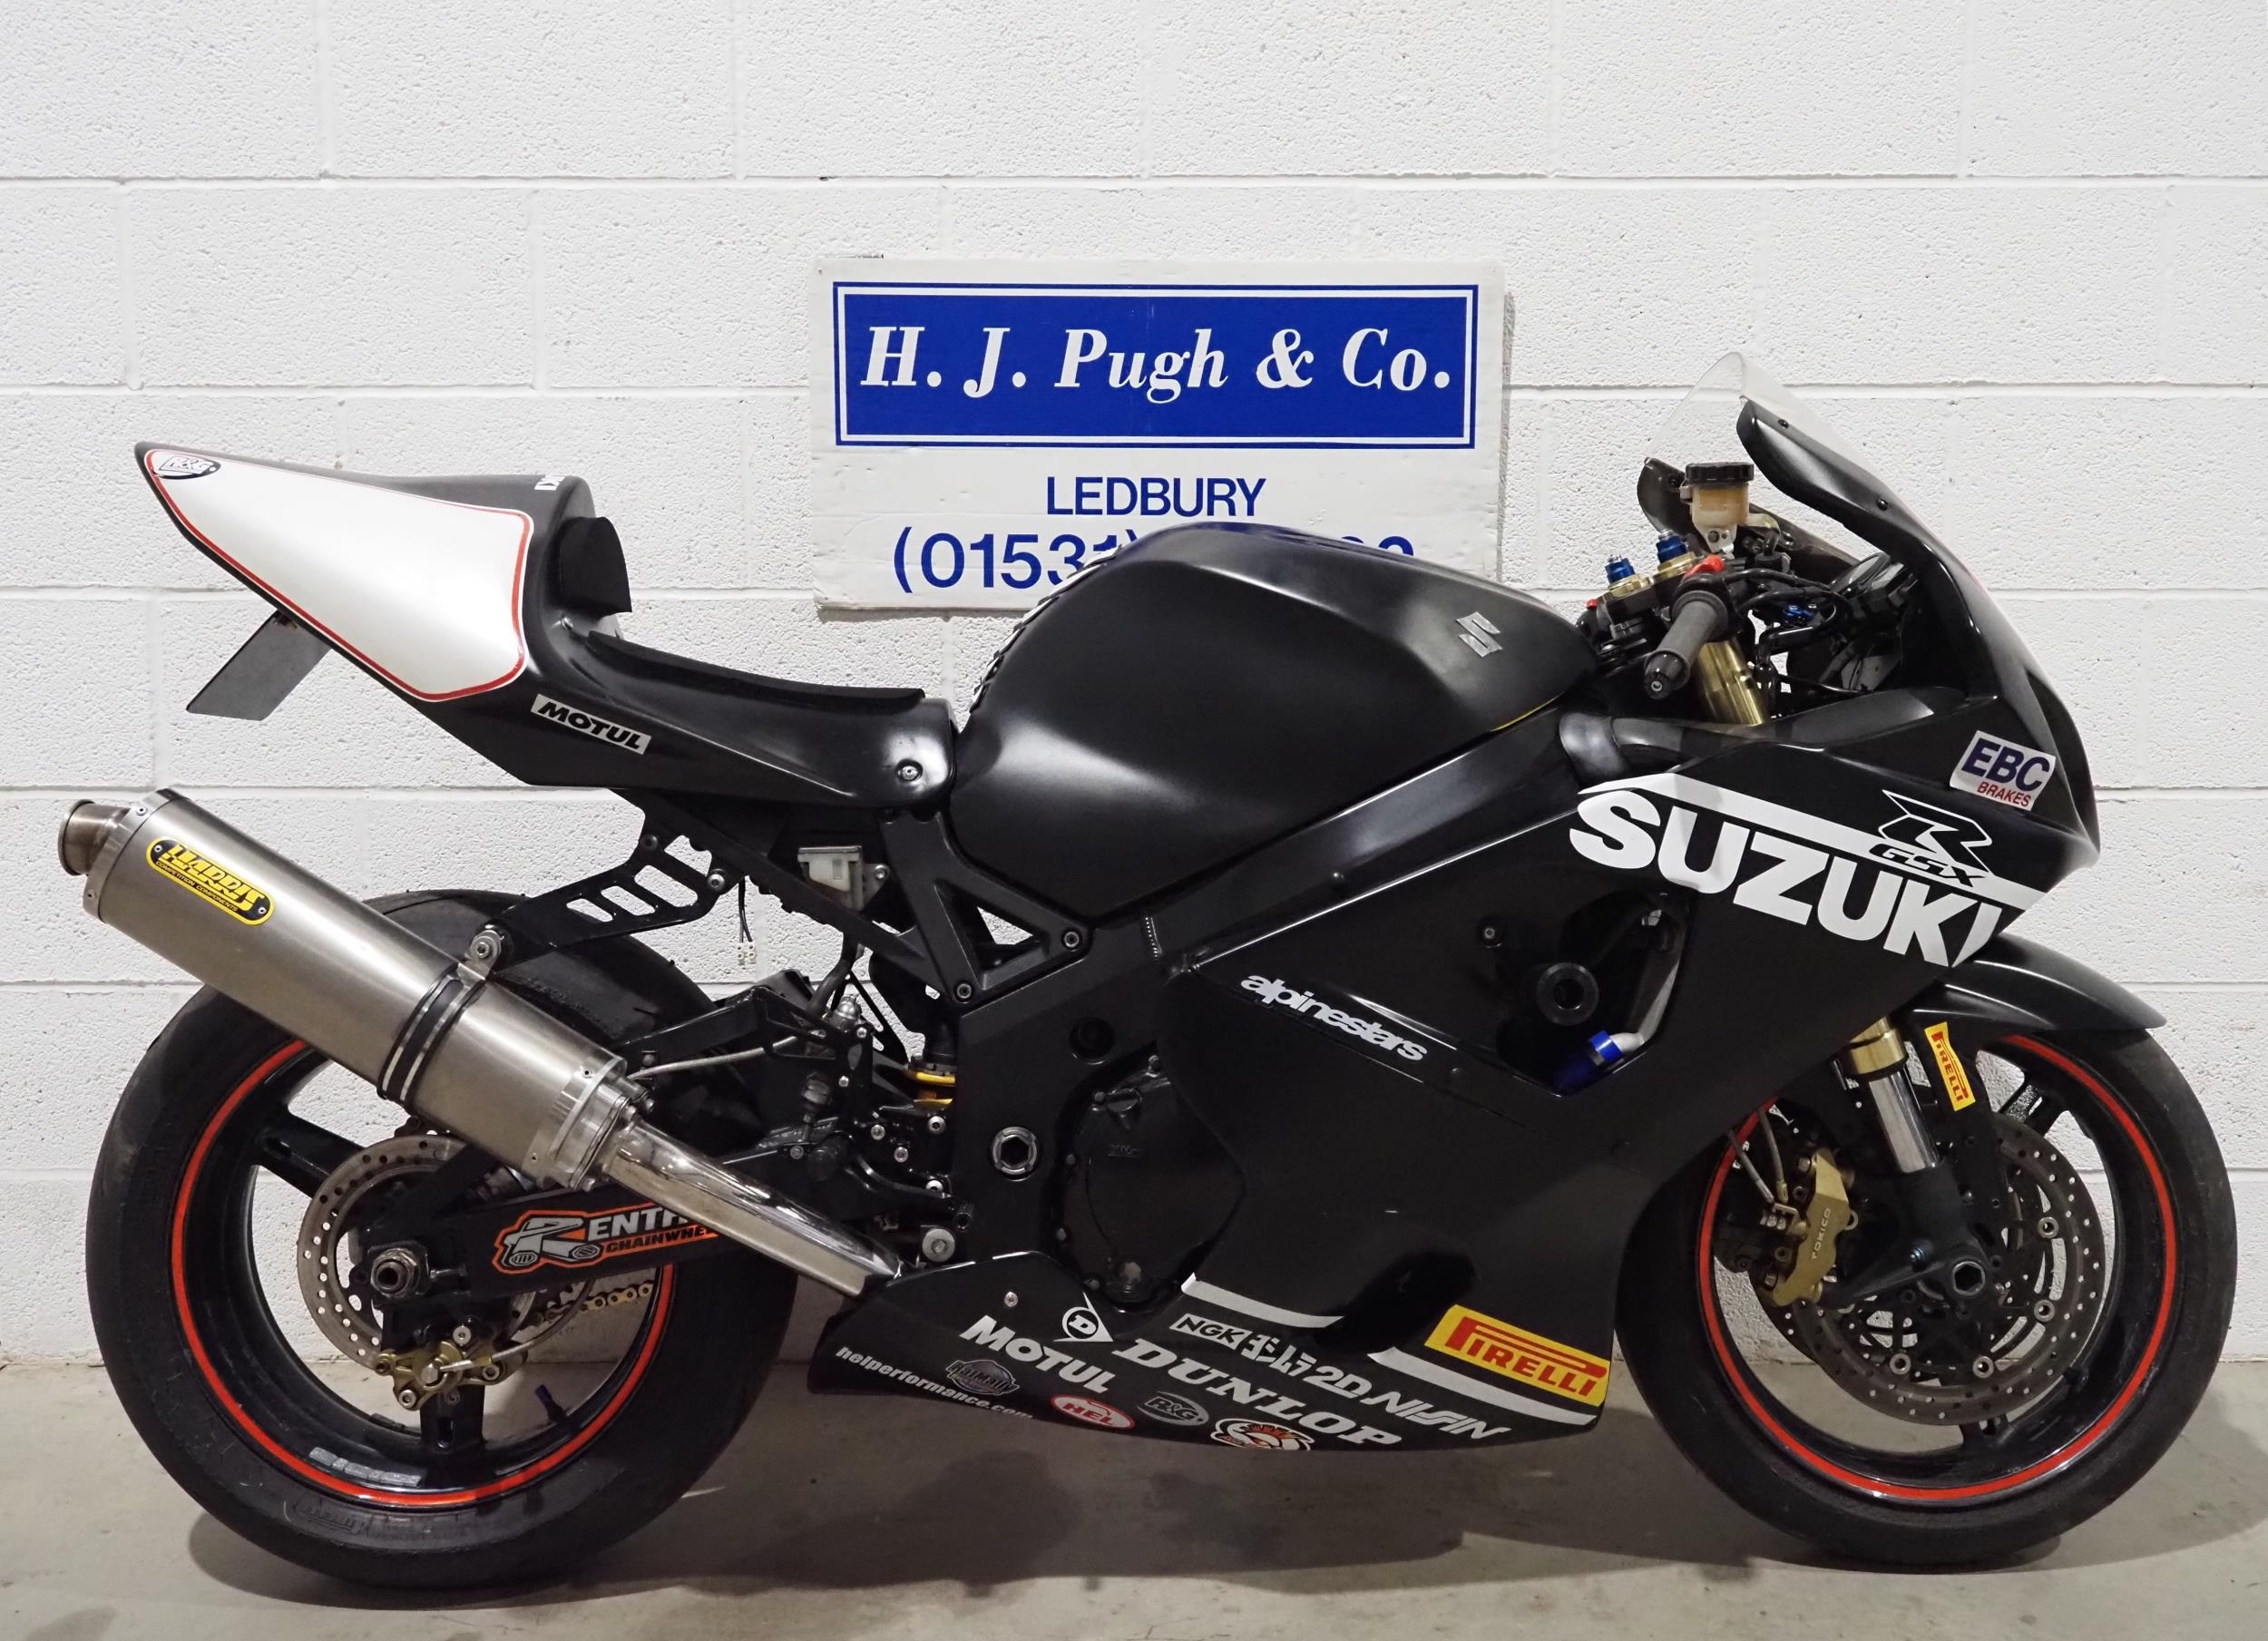 Suzuki GSXR 750 K5 motorcycle. 2005. 749cc Runs and rides. Track bike with Shorty levers, K & N